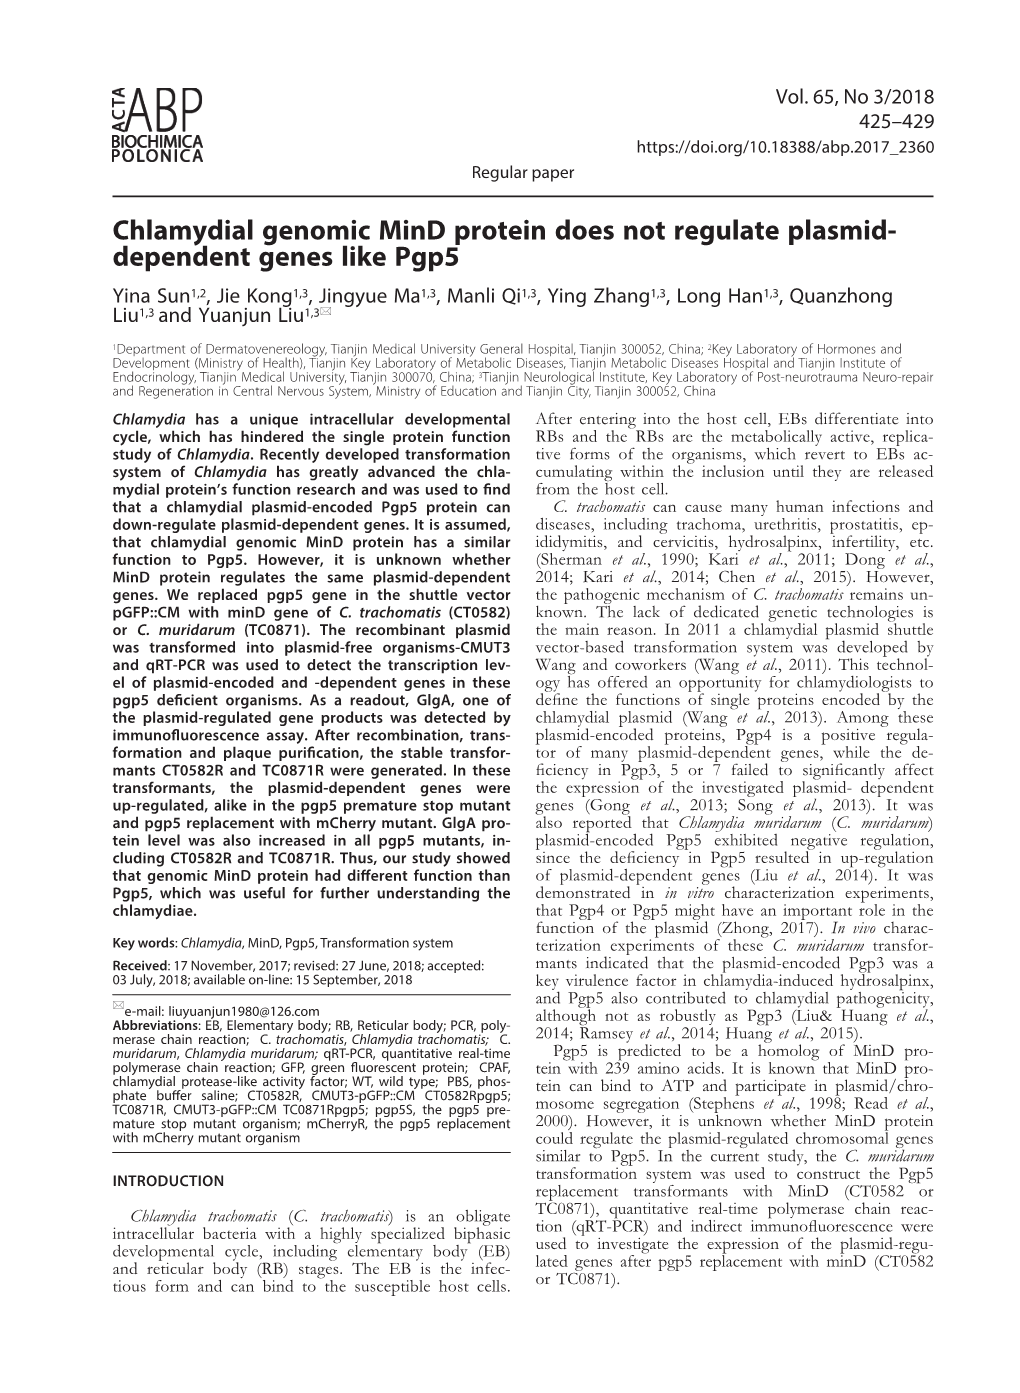 Chlamydial Genomic Mind Protein Does Not Regulate Plasmid